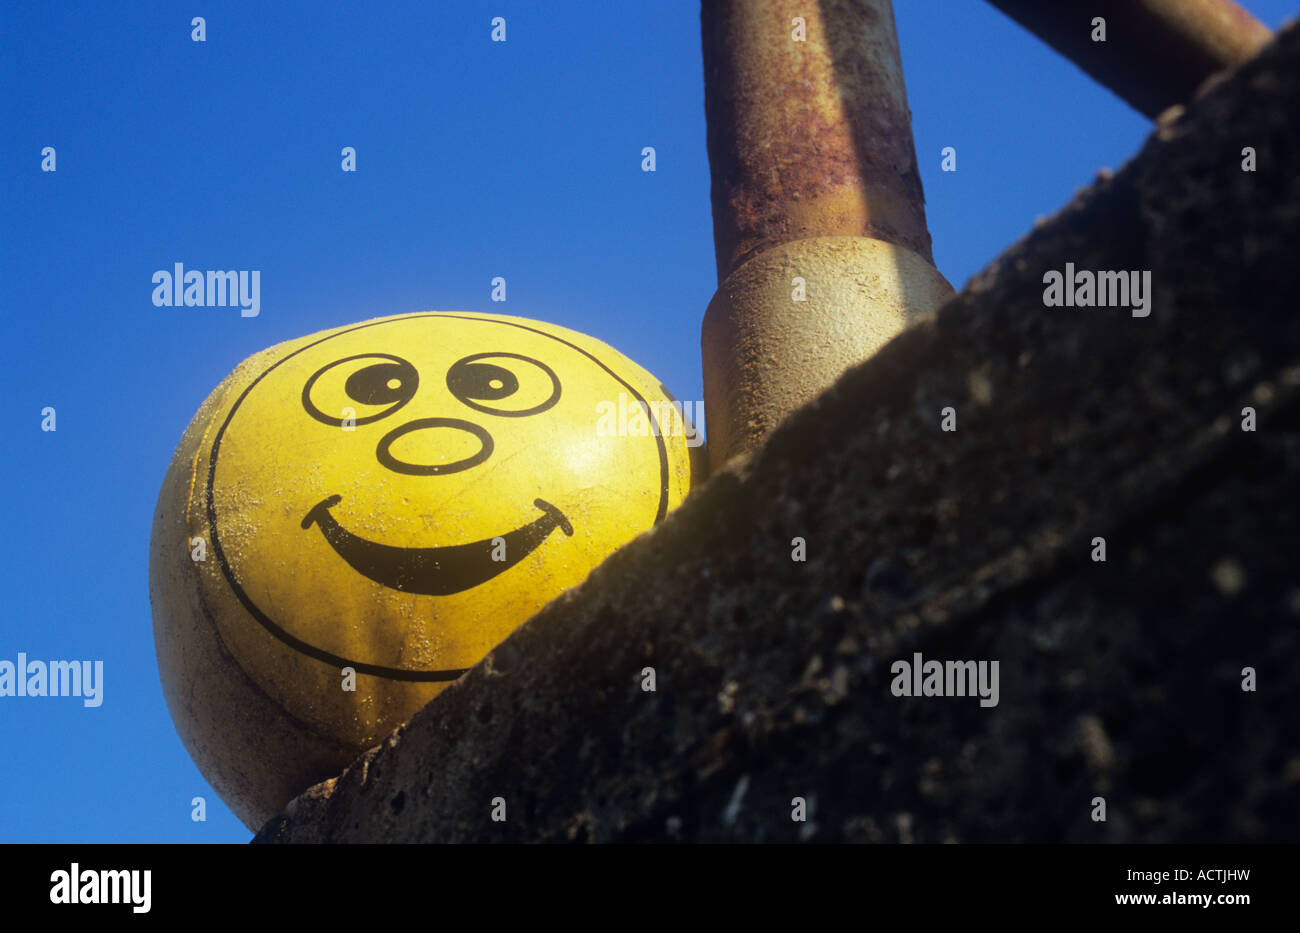 Soft padded yellow vinyl ball with cheeky smiley face and sand grains by rusty railings on concrete wall under clear blue sky Stock Photo